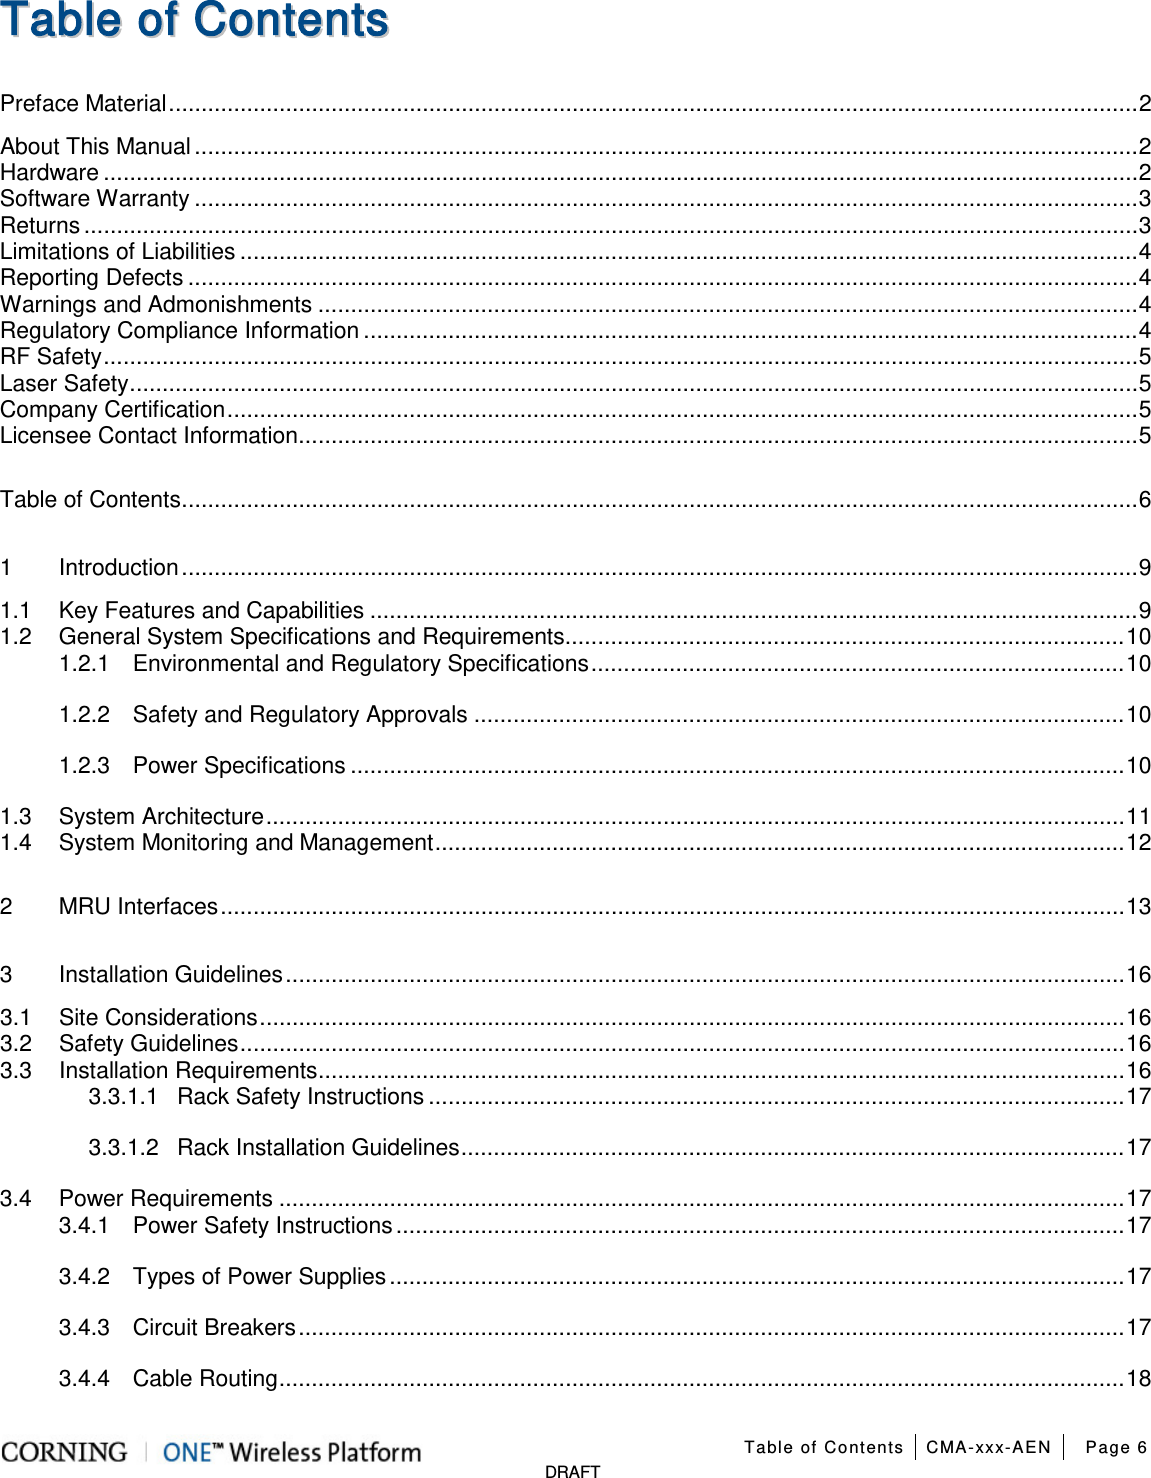  Table of Contents CMA-xxx-AEN Page 6   DRAFT TTaabbllee  ooff  CCoonntteennttss  Preface Material ..................................................................................................................................................... 2 About This Manual ................................................................................................................................................. 2 Hardware ............................................................................................................................................................... 2 Software Warranty ................................................................................................................................................. 3 Returns .................................................................................................................................................................. 3 Limitations of Liabilities .......................................................................................................................................... 4 Reporting Defects .................................................................................................................................................. 4 Warnings and Admonishments .............................................................................................................................. 4 Regulatory Compliance Information ....................................................................................................................... 4 RF Safety ............................................................................................................................................................... 5 Laser Safety ........................................................................................................................................................... 5 Company Certification ............................................................................................................................................ 5 Licensee Contact Information ................................................................................................................................. 5 Table of Contents ................................................................................................................................................... 6 1 Introduction ................................................................................................................................................... 9 1.1 Key Features and Capabilities ...................................................................................................................... 9 1.2 General System Specifications and Requirements ...................................................................................... 10 1.2.1 Environmental and Regulatory Specifications .................................................................................. 10 1.2.2 Safety and Regulatory Approvals .................................................................................................... 10 1.2.3 Power Specifications ....................................................................................................................... 10 1.3 System Architecture .................................................................................................................................... 11 1.4 System Monitoring and Management .......................................................................................................... 12 2 MRU Interfaces ........................................................................................................................................... 13 3 Installation Guidelines ................................................................................................................................. 16 3.1 Site Considerations ..................................................................................................................................... 16 3.2 Safety Guidelines ........................................................................................................................................ 16 3.3 Installation Requirements ............................................................................................................................ 16 3.3.1.1 Rack Safety Instructions ........................................................................................................... 17 3.3.1.2 Rack Installation Guidelines ...................................................................................................... 17 3.4 Power Requirements .................................................................................................................................. 17 3.4.1 Power Safety Instructions ................................................................................................................ 17 3.4.2 Types of Power Supplies ................................................................................................................. 17 3.4.3 Circuit Breakers ............................................................................................................................... 17 3.4.4 Cable Routing .................................................................................................................................. 18 